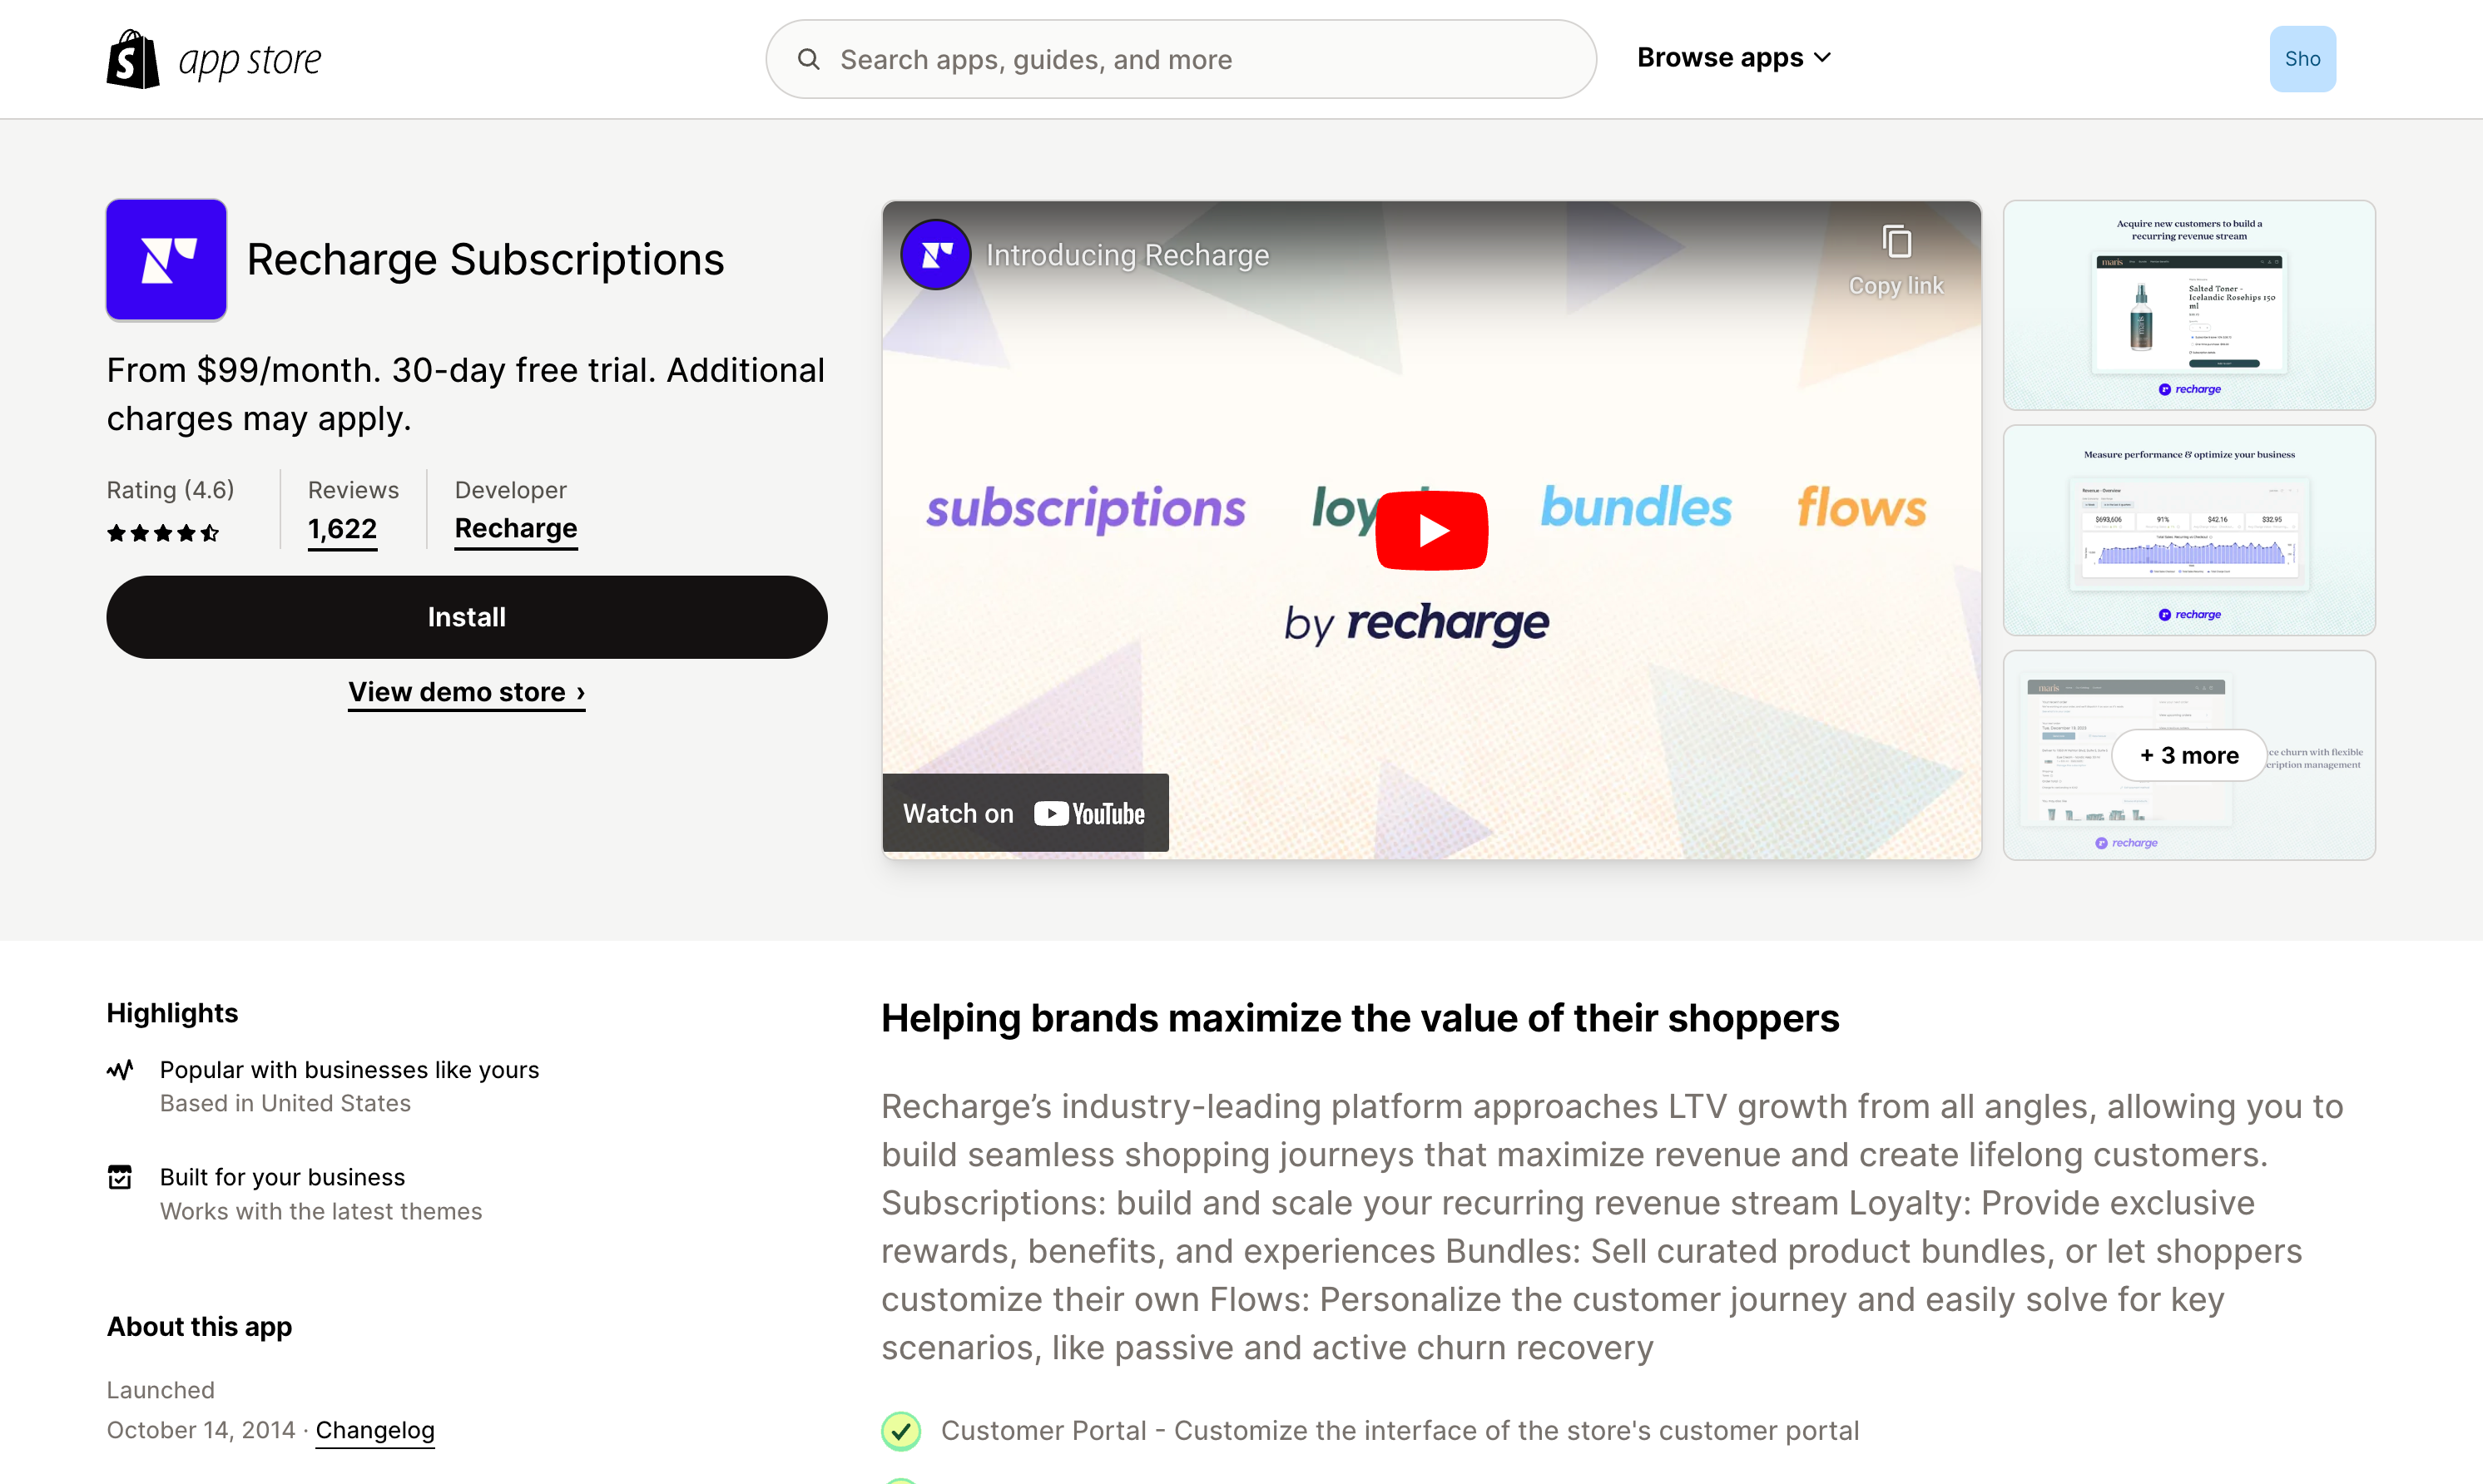 Shopify app store: Recharge Subscriptions